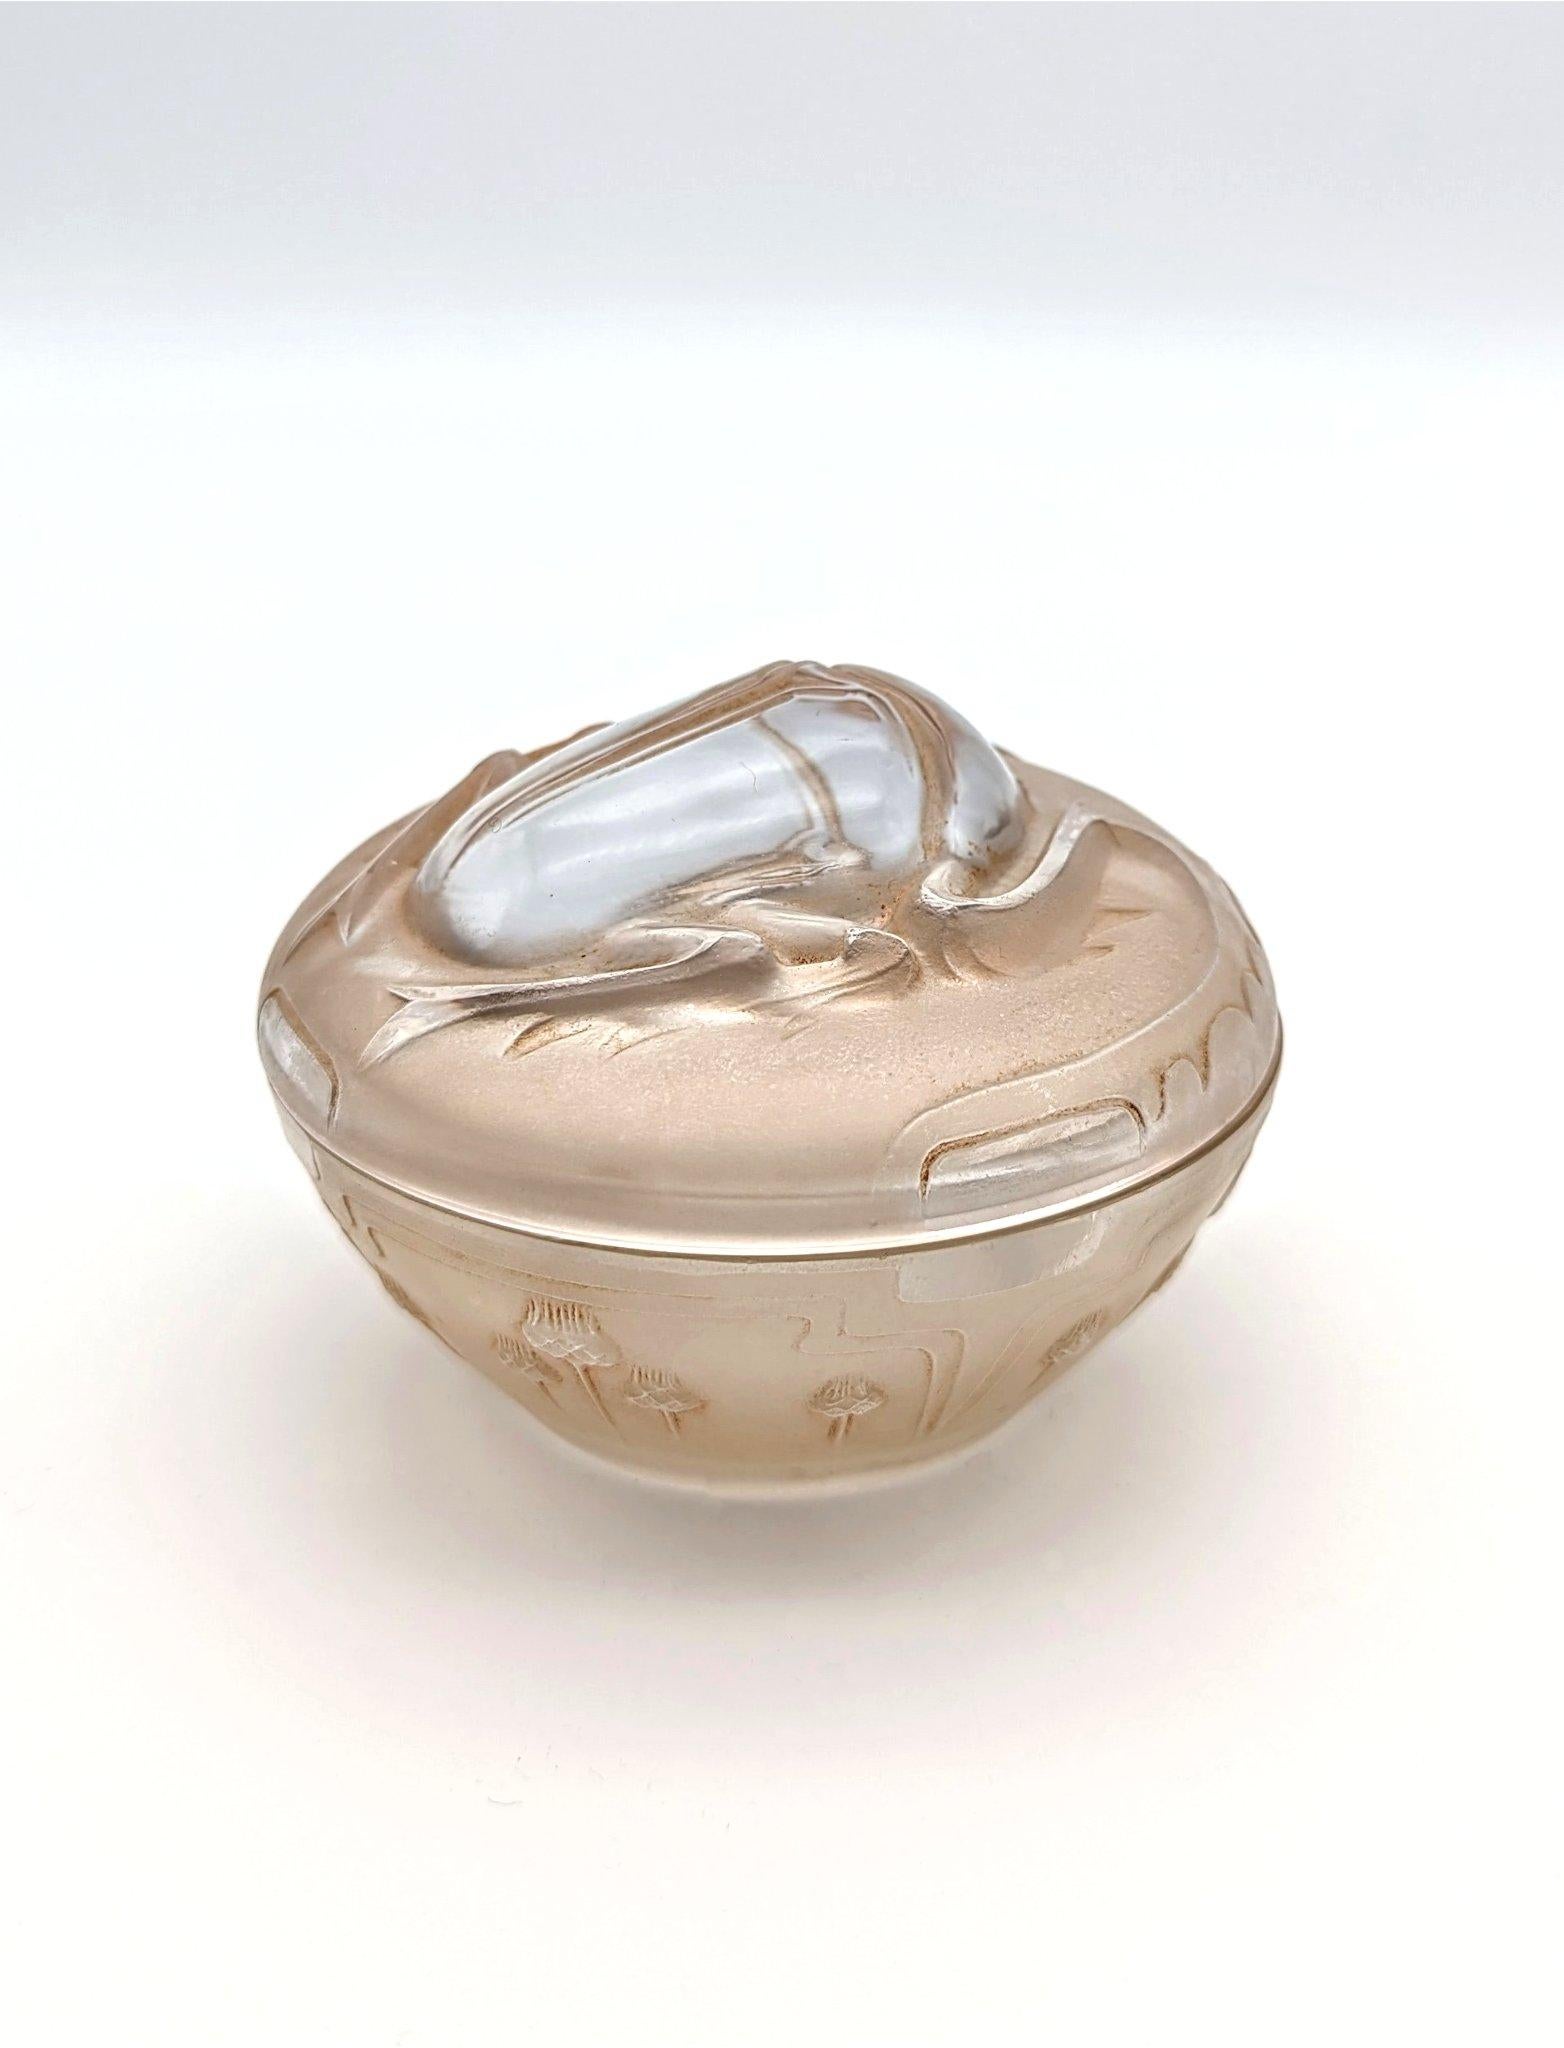 A gorgeous early design by René Lalique for the perfume maker L.T.Piver in Paris. The Scarabée series was featuring scarabs on Piver's perfume bottles of different sizes and also included this box for crème. It is documented in the « René Lalique